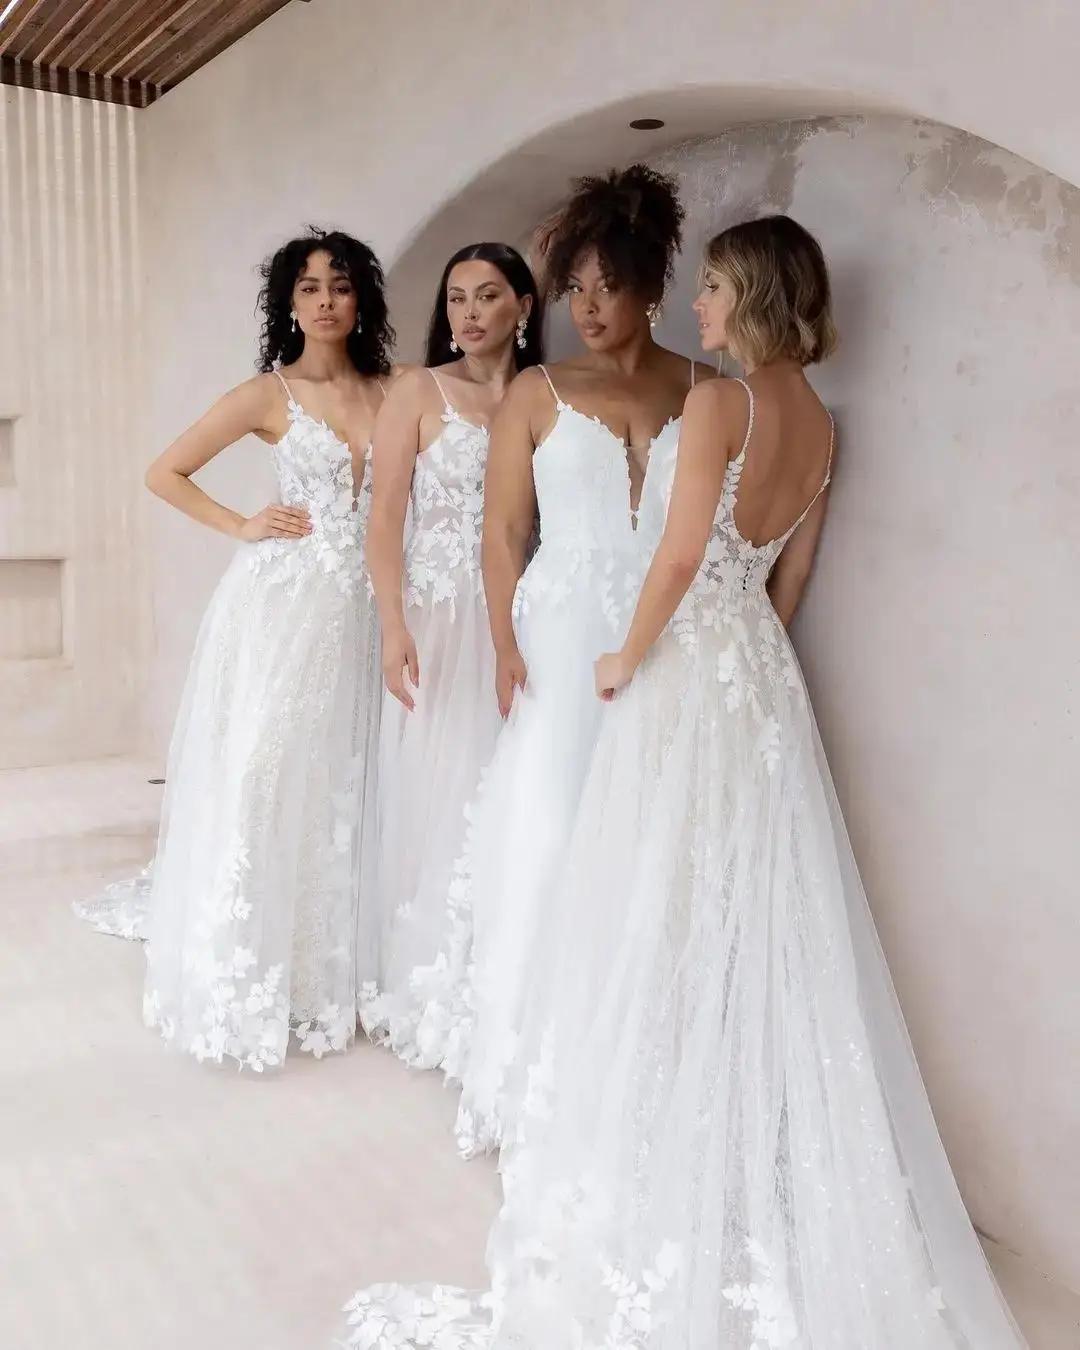 Models wearing different sizes of the same wedding dress